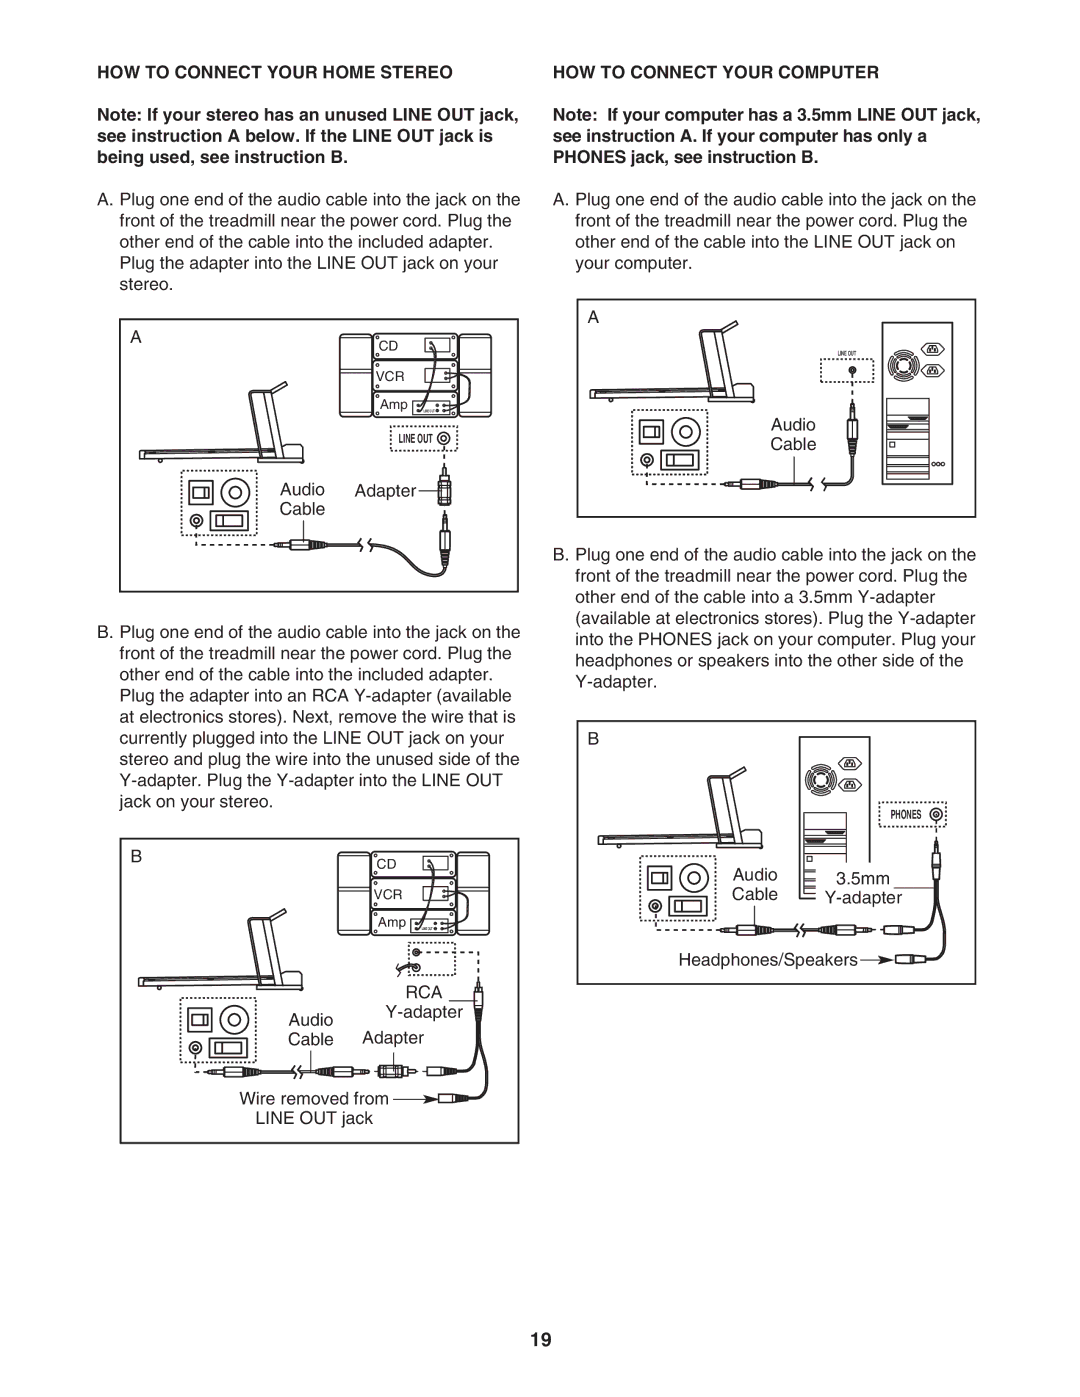 ProForm PFTL591040 user manual HOW to Connect Your Home Stereo, HOW to Connect Your Computer 